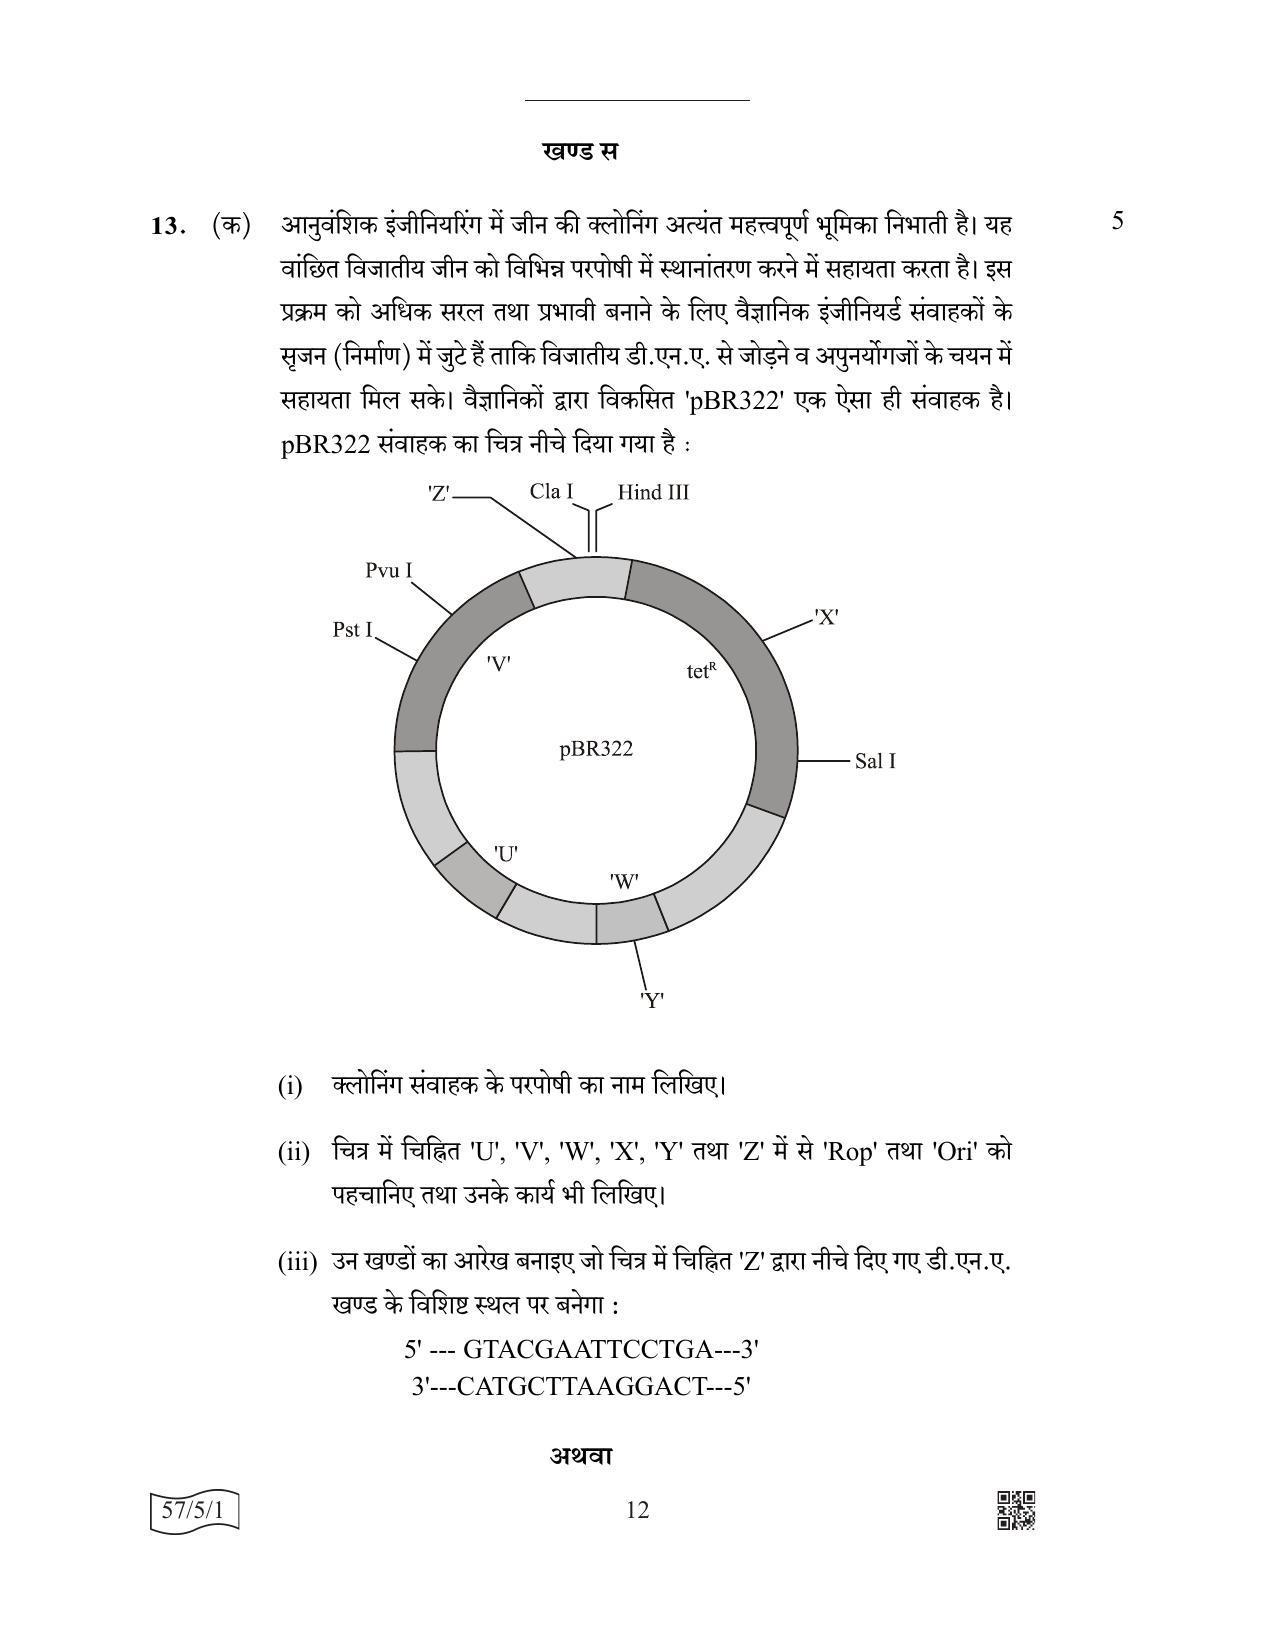 CBSE Class 12 57-5-1 Biology 2022 Question Paper - Page 12